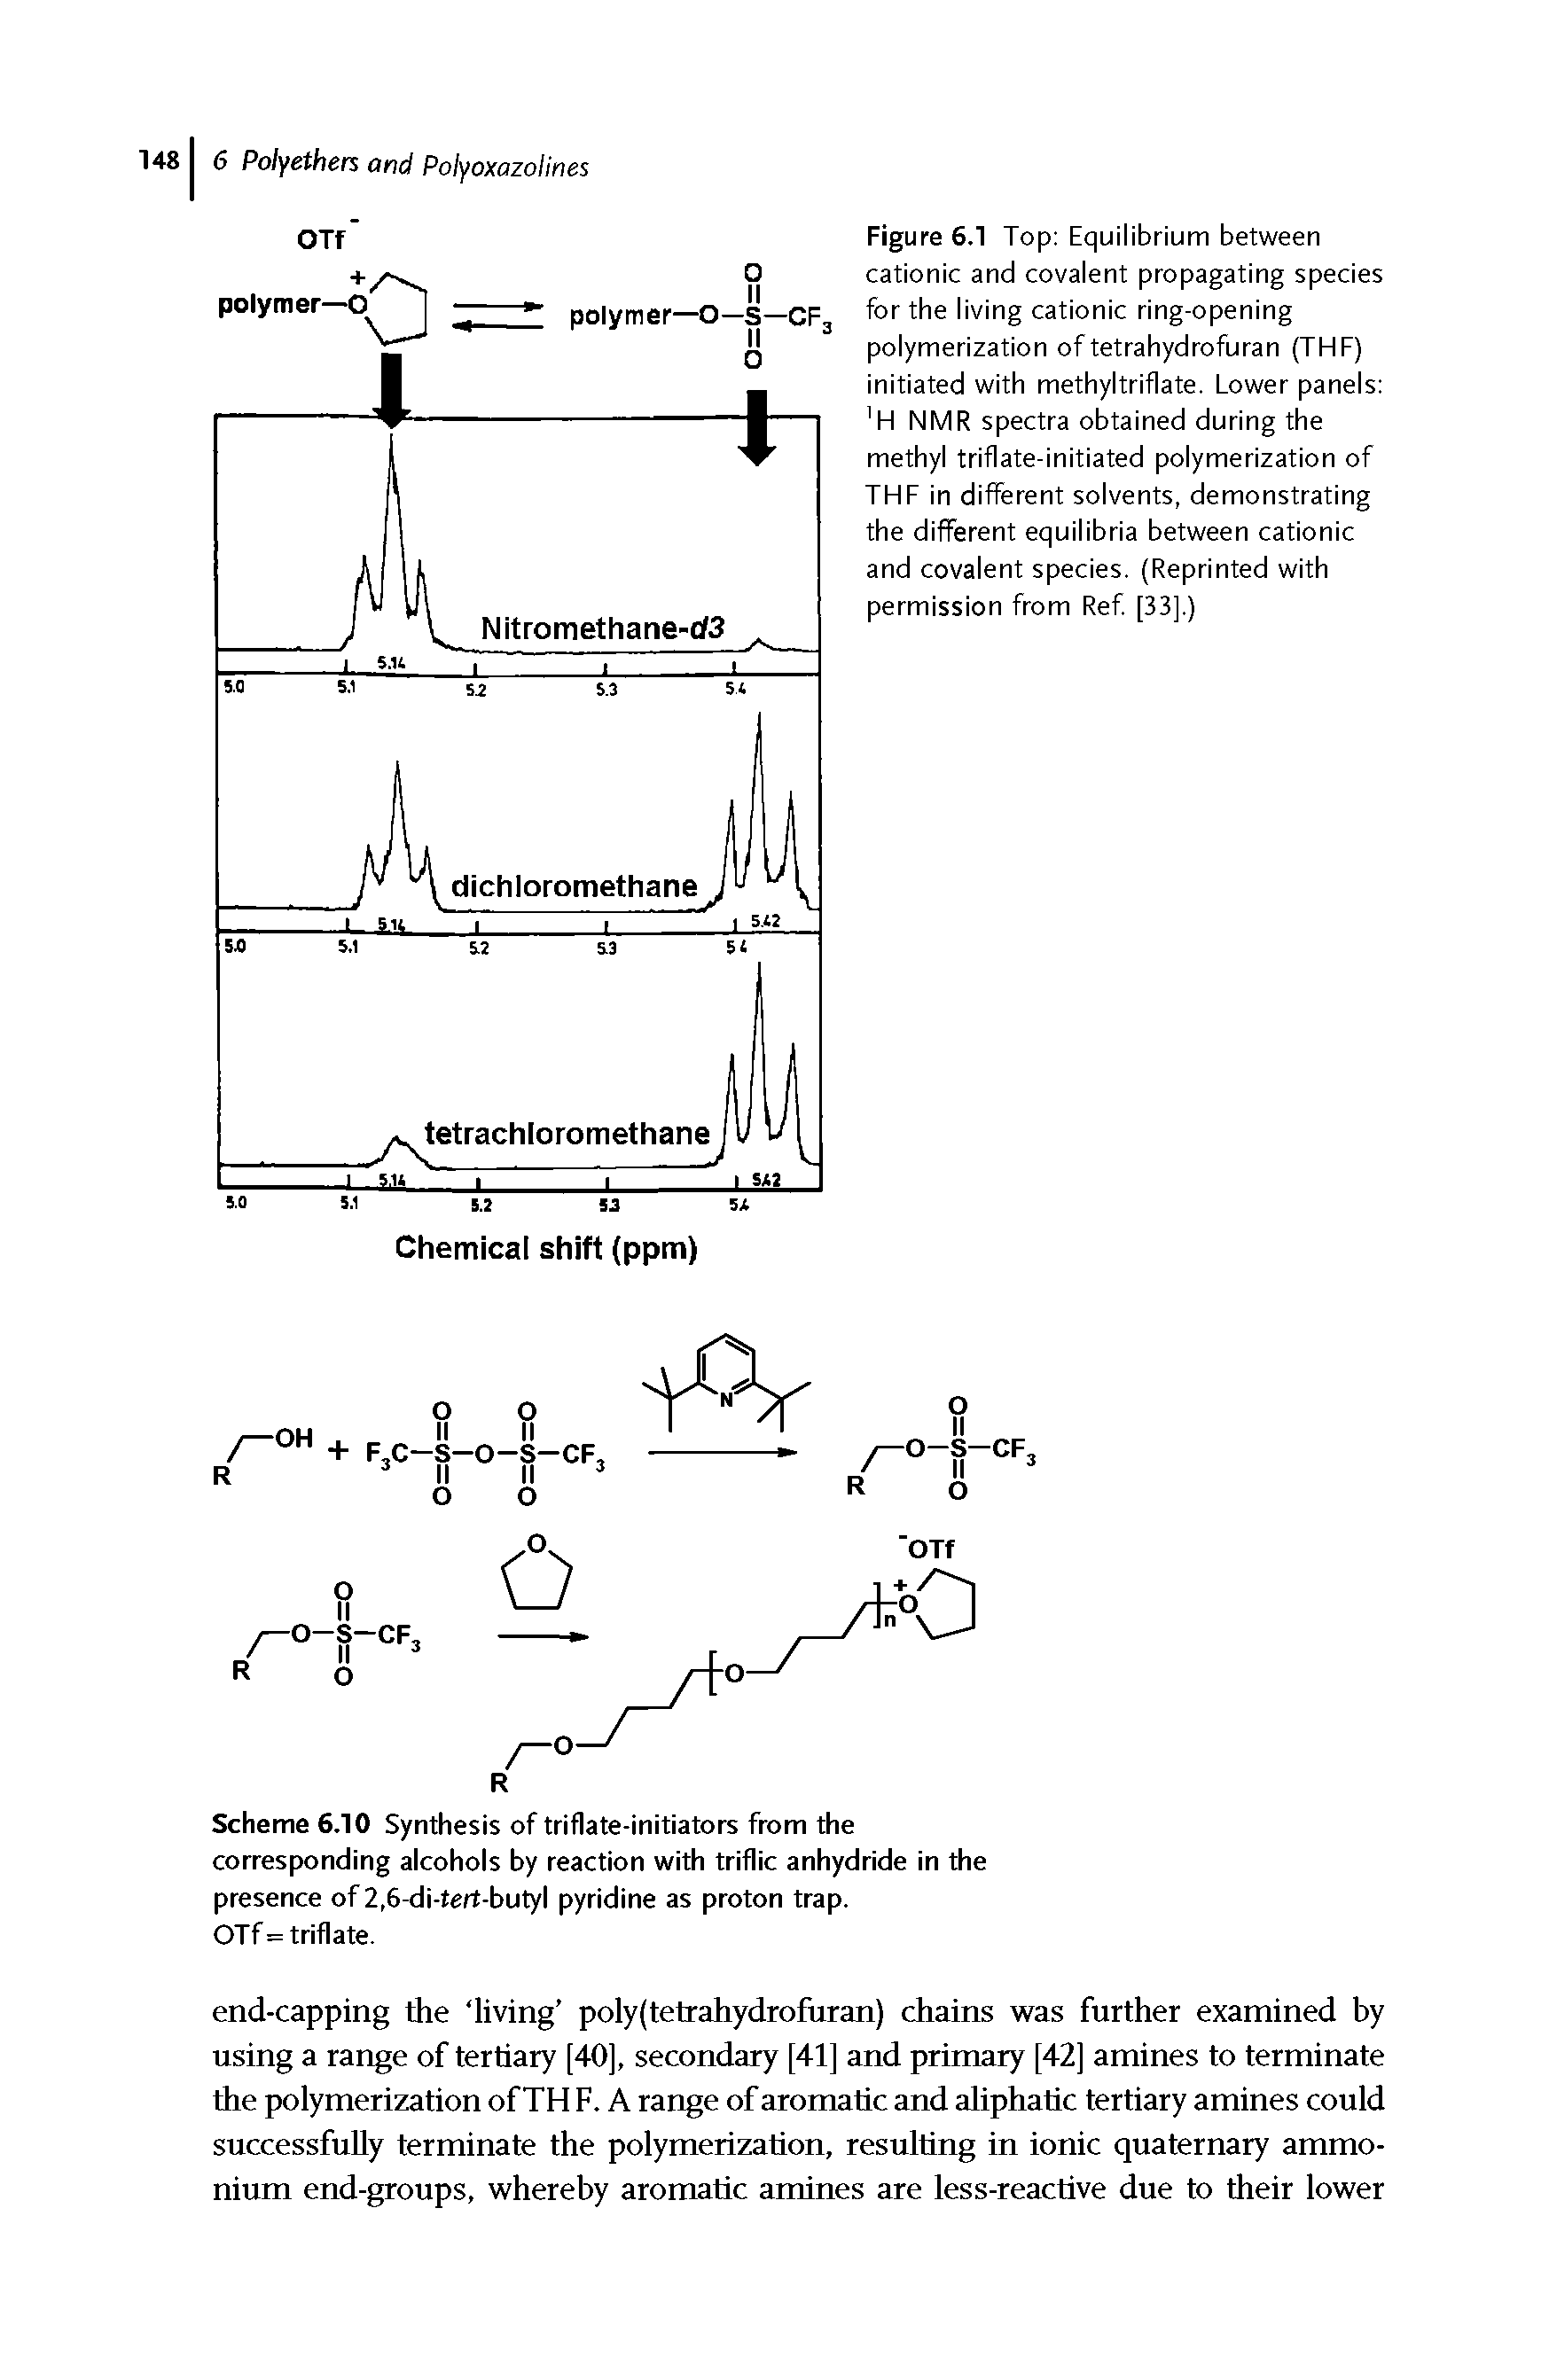 Scheme 6.10 Synthesis of triflate-initiators from the corresponding alcohols by reaction with triflic anhydride in the presence of 2,6-di-tert-butyl pyridine as proton trap.